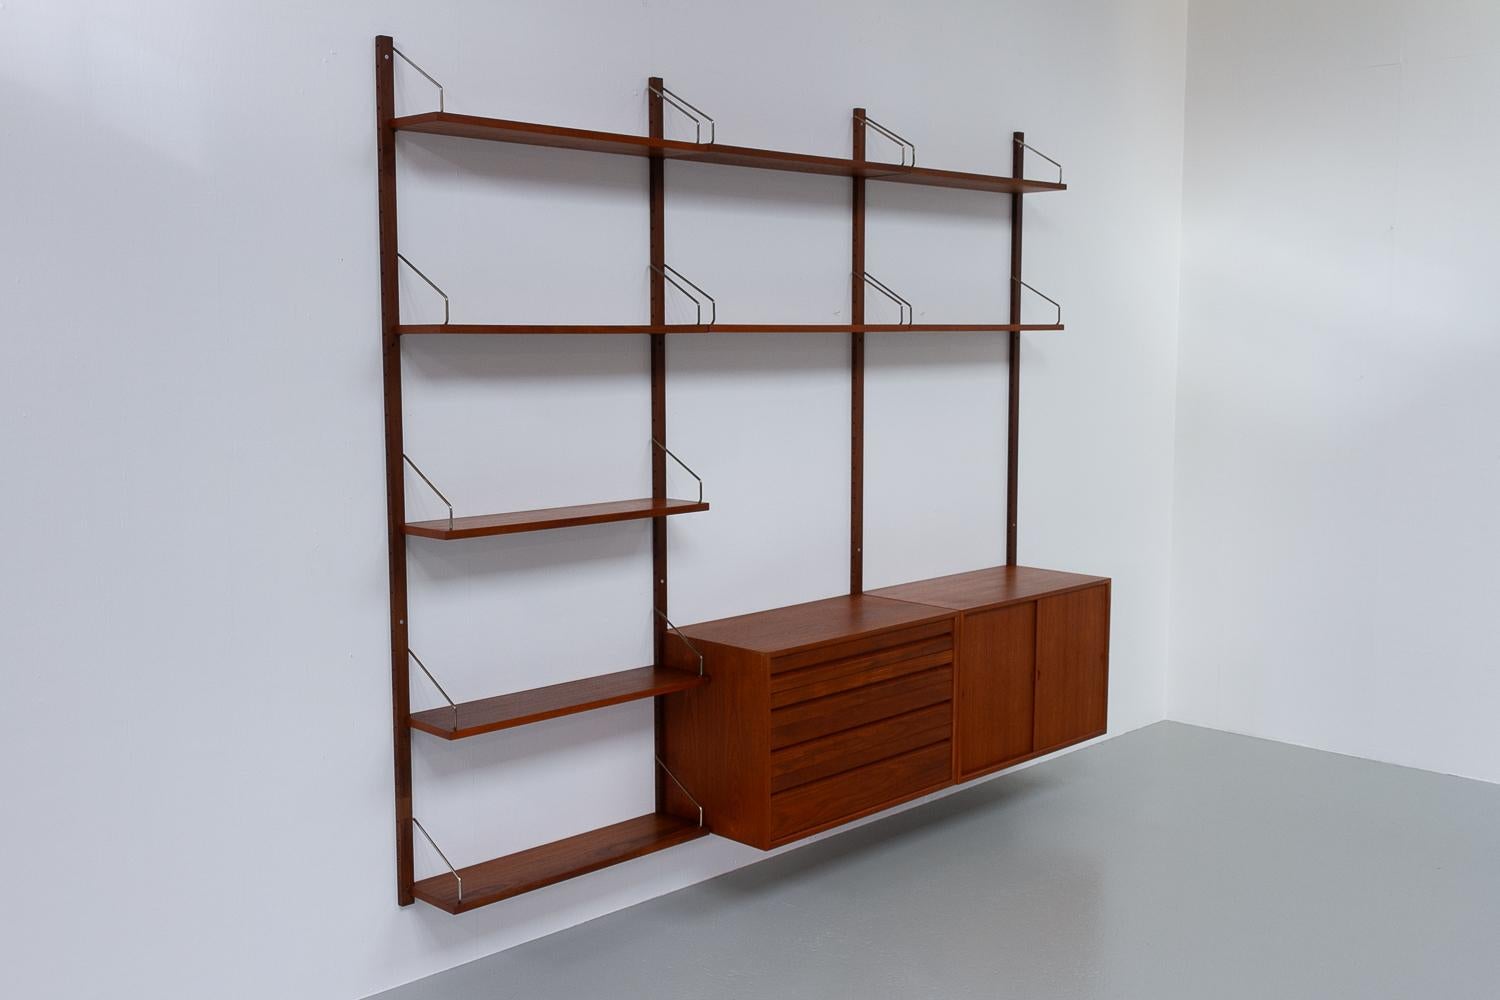 Danish Modern 3-Bay Modular Teak Wall Unit by Poul Cadovius for Cado, 1960s.

Mid-Century Modern 3 bay shelving system model Royal. This is an original vintage floating bookcase designed in 1948 by Danish architect Poul Cadovius. 
Cadovius had the